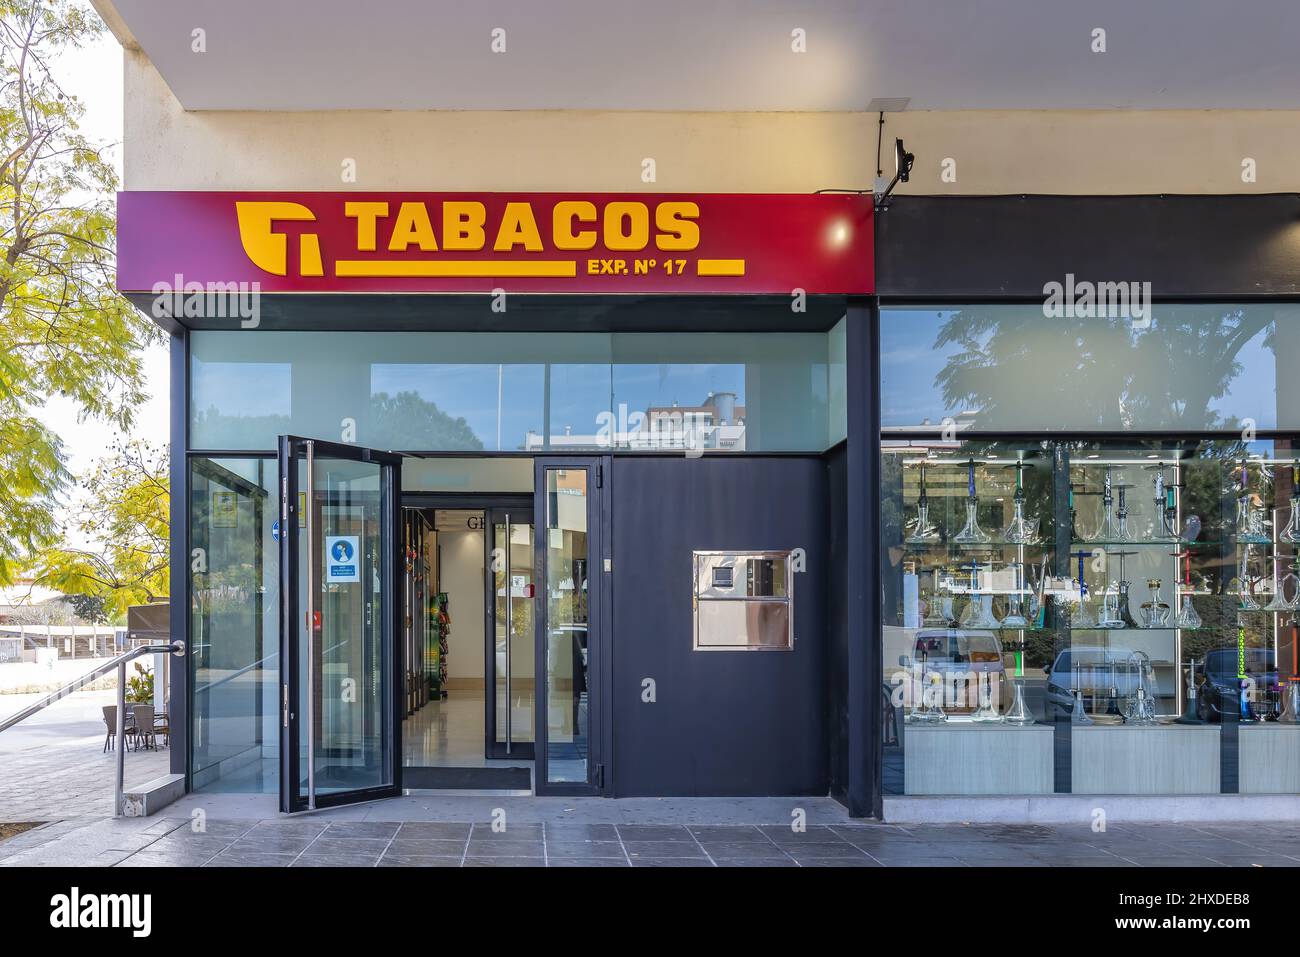 Huelva, Spain - March 10, 2022: Exterior of a Tobacco store with the Sign of a Spanish public tobacconist "Tabacos" Stock Photo